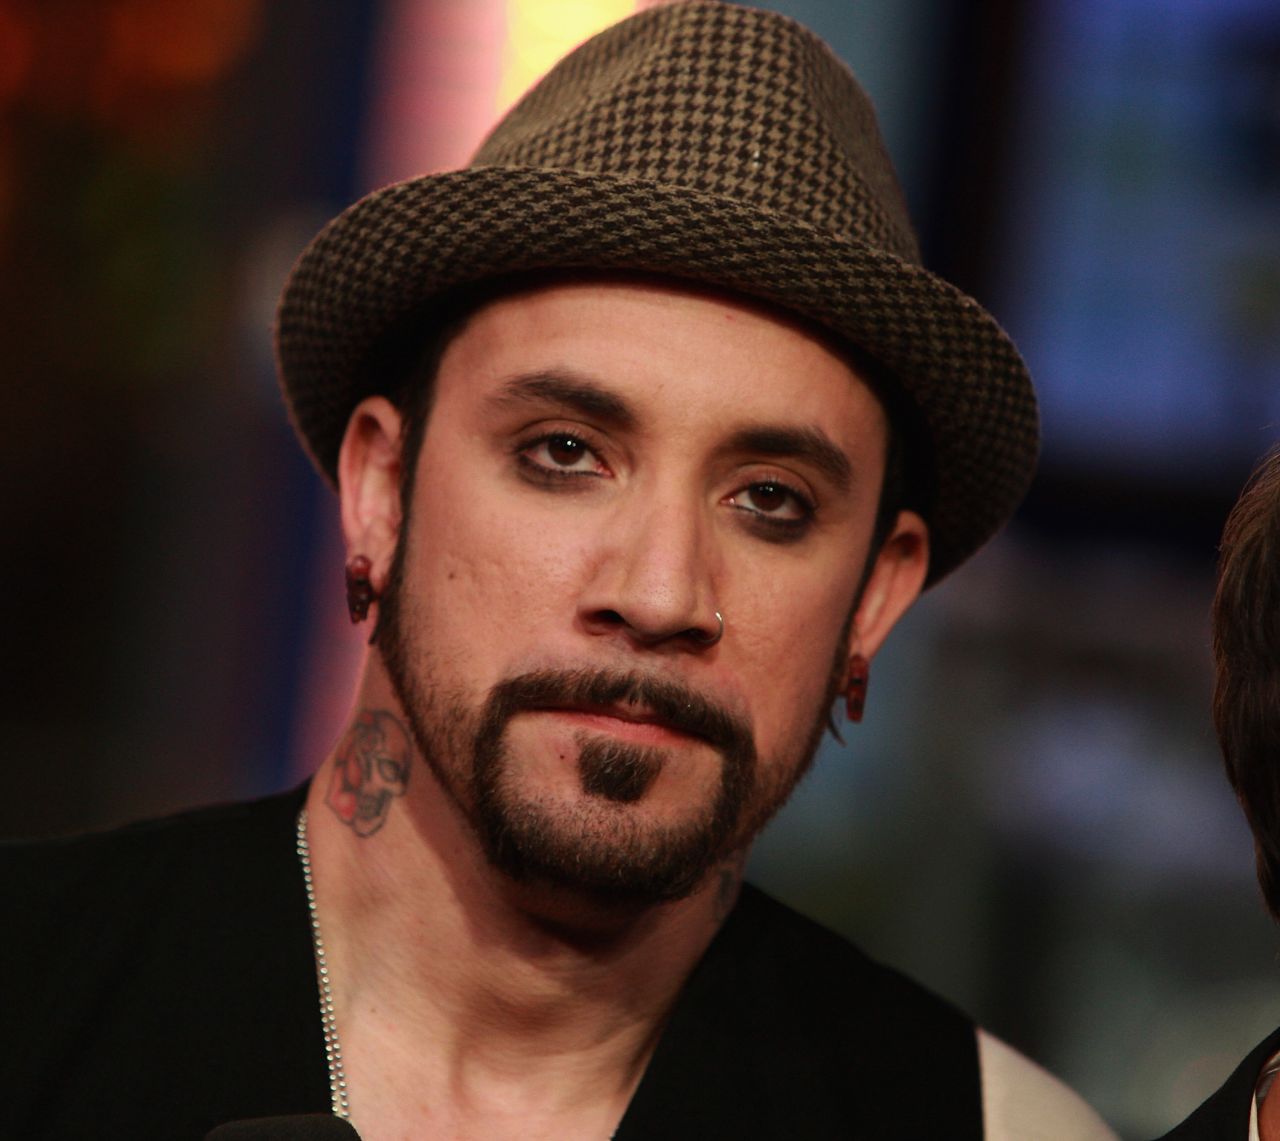 Backstreet Boys member A.J. McLean <a href="http://www.people.com/people/article/0,,20457452,00.html" target="_blank" target="_blank">last checked into</a> rehab in 2011. He had previously been treated for depression, anxiety and excessive alcohol consumption.